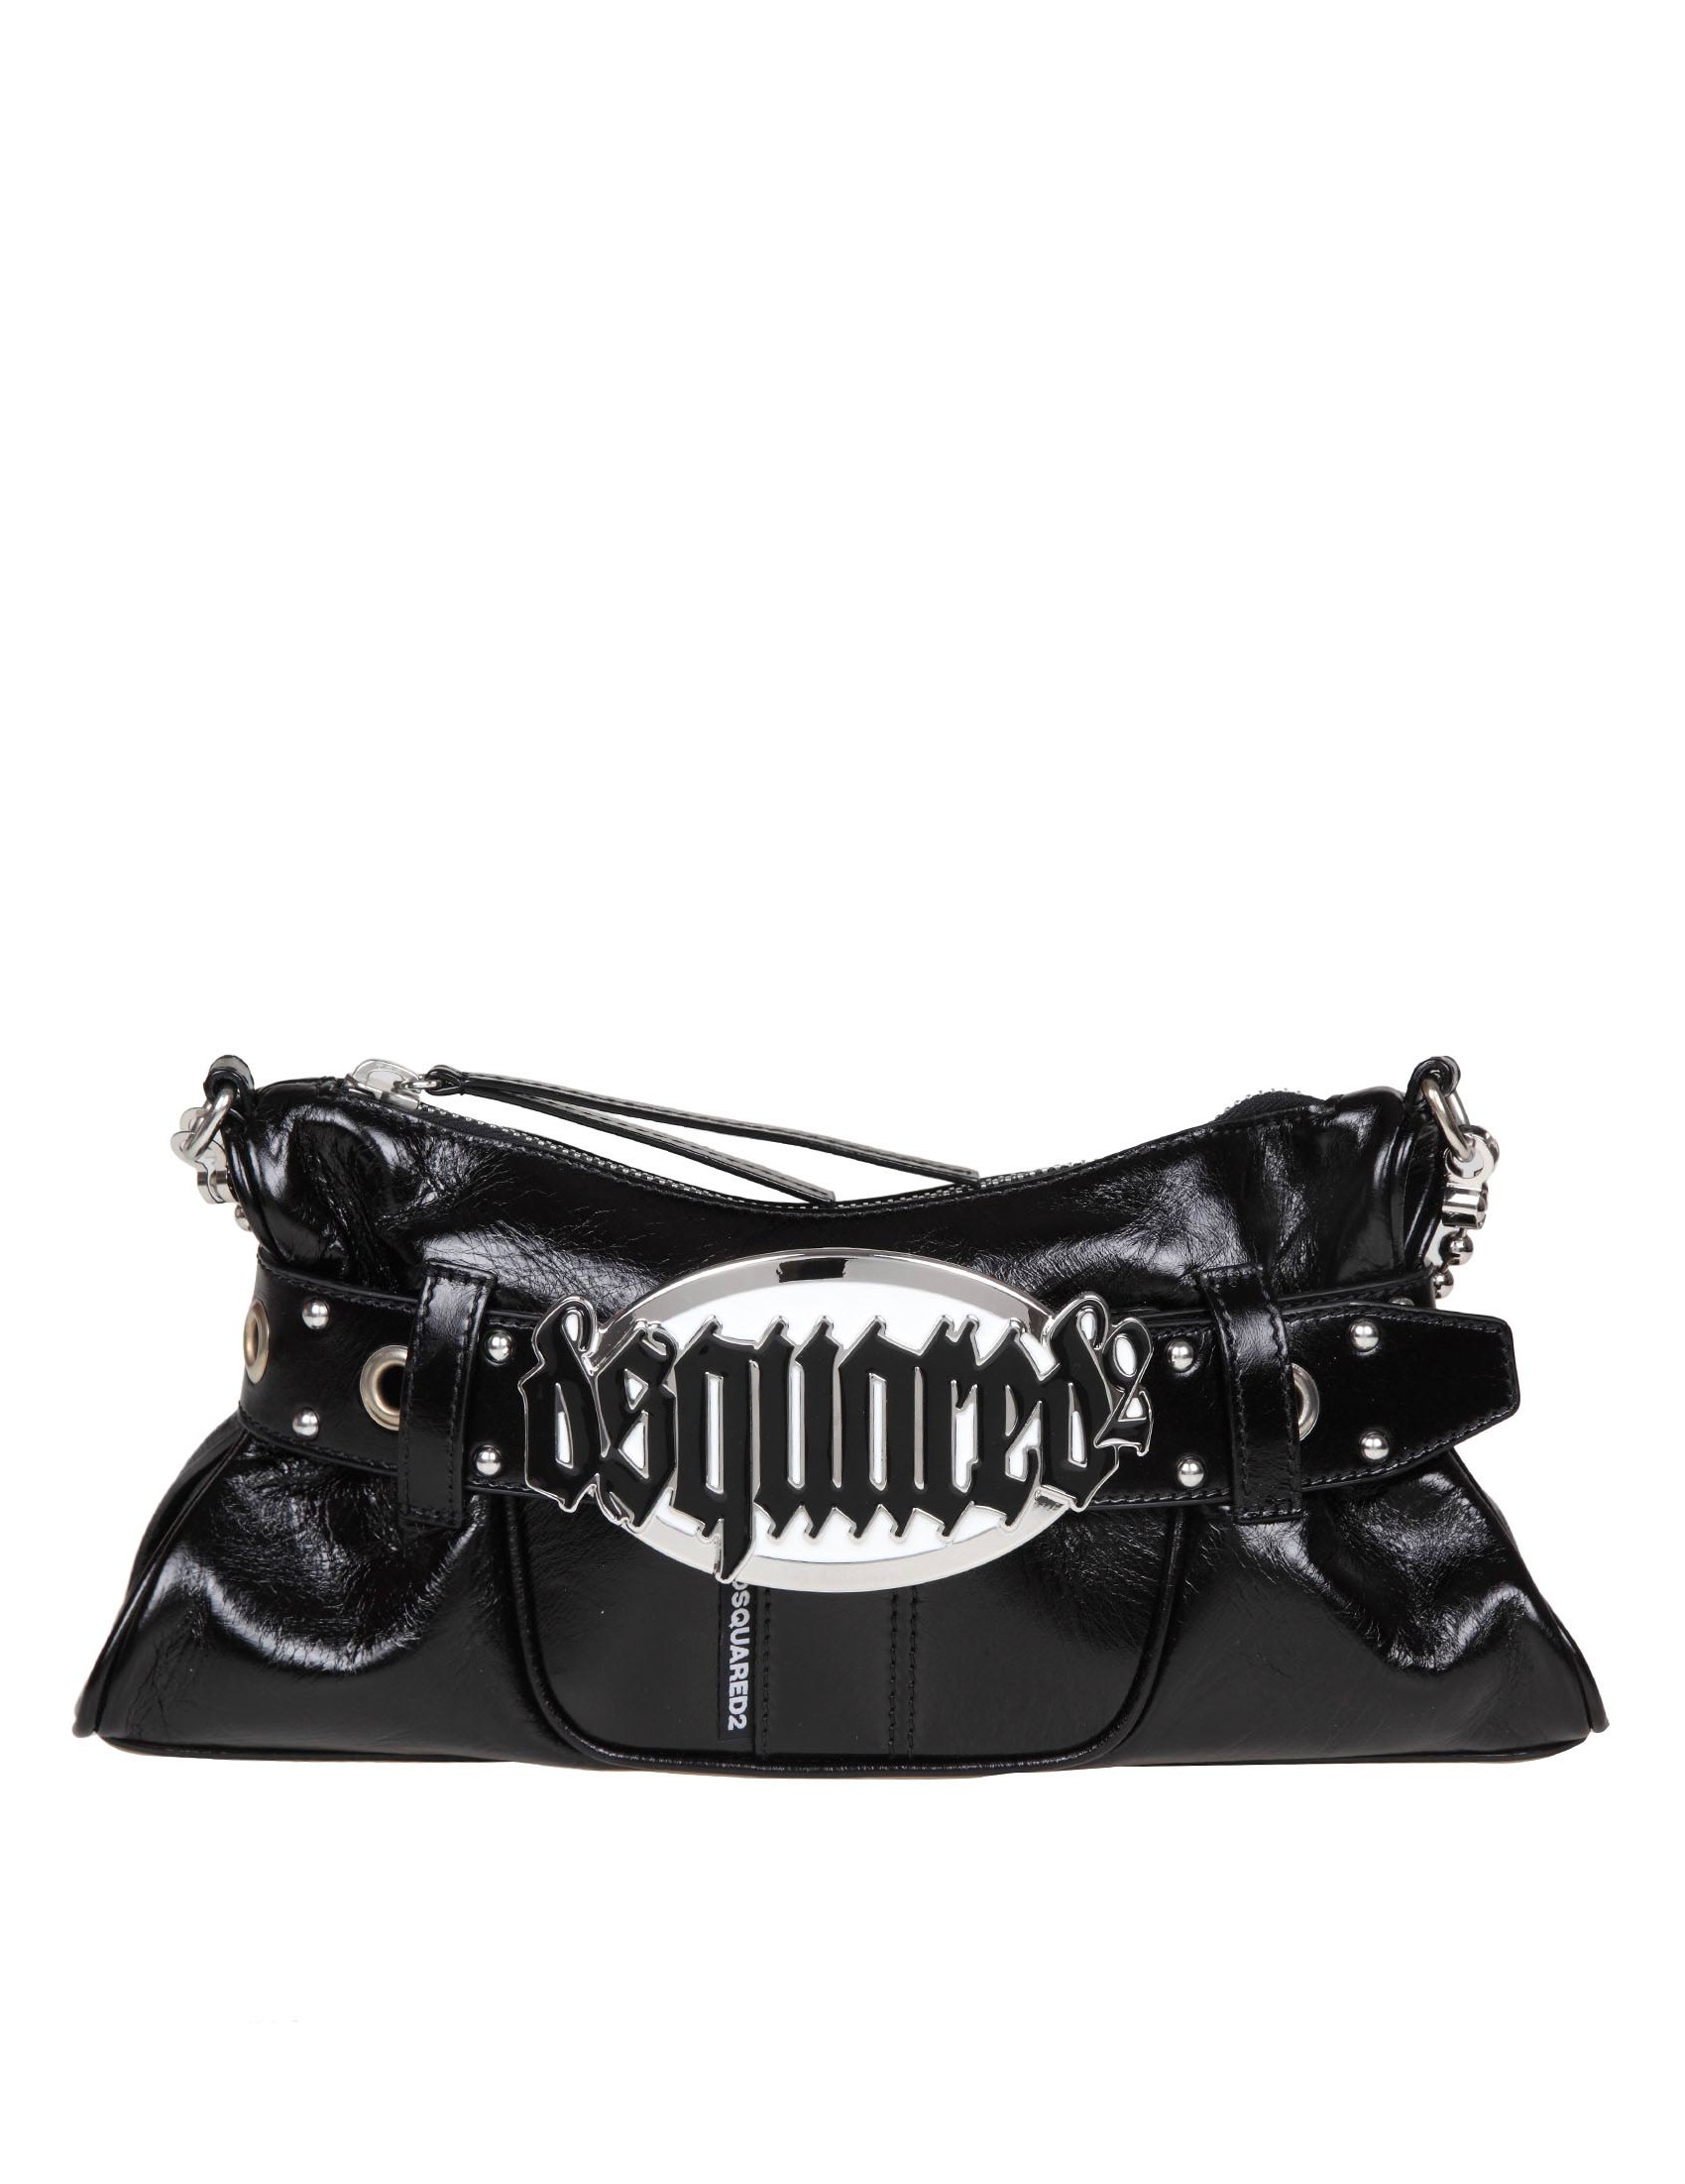 DSQUARED2 GOTHIC LEATHER CLUTCH WITH LOGO